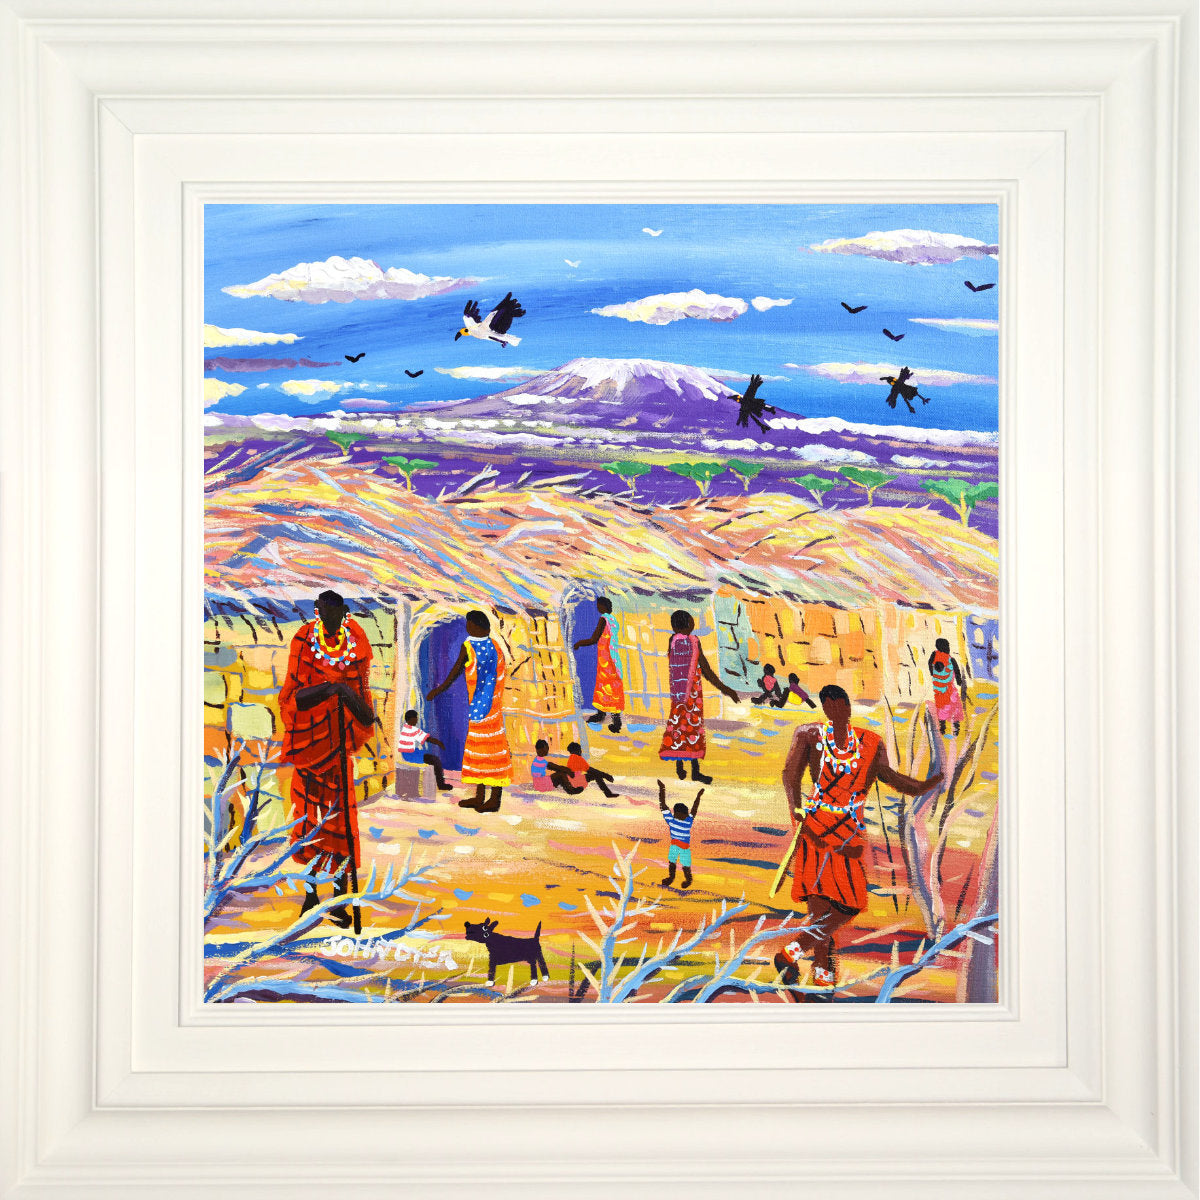 &#39;A Day with the Maasai, Cultural Boma, Amboseli&#39;, 18x18 inches acrylic on canvas. African Painting by British Artist John Dyer.